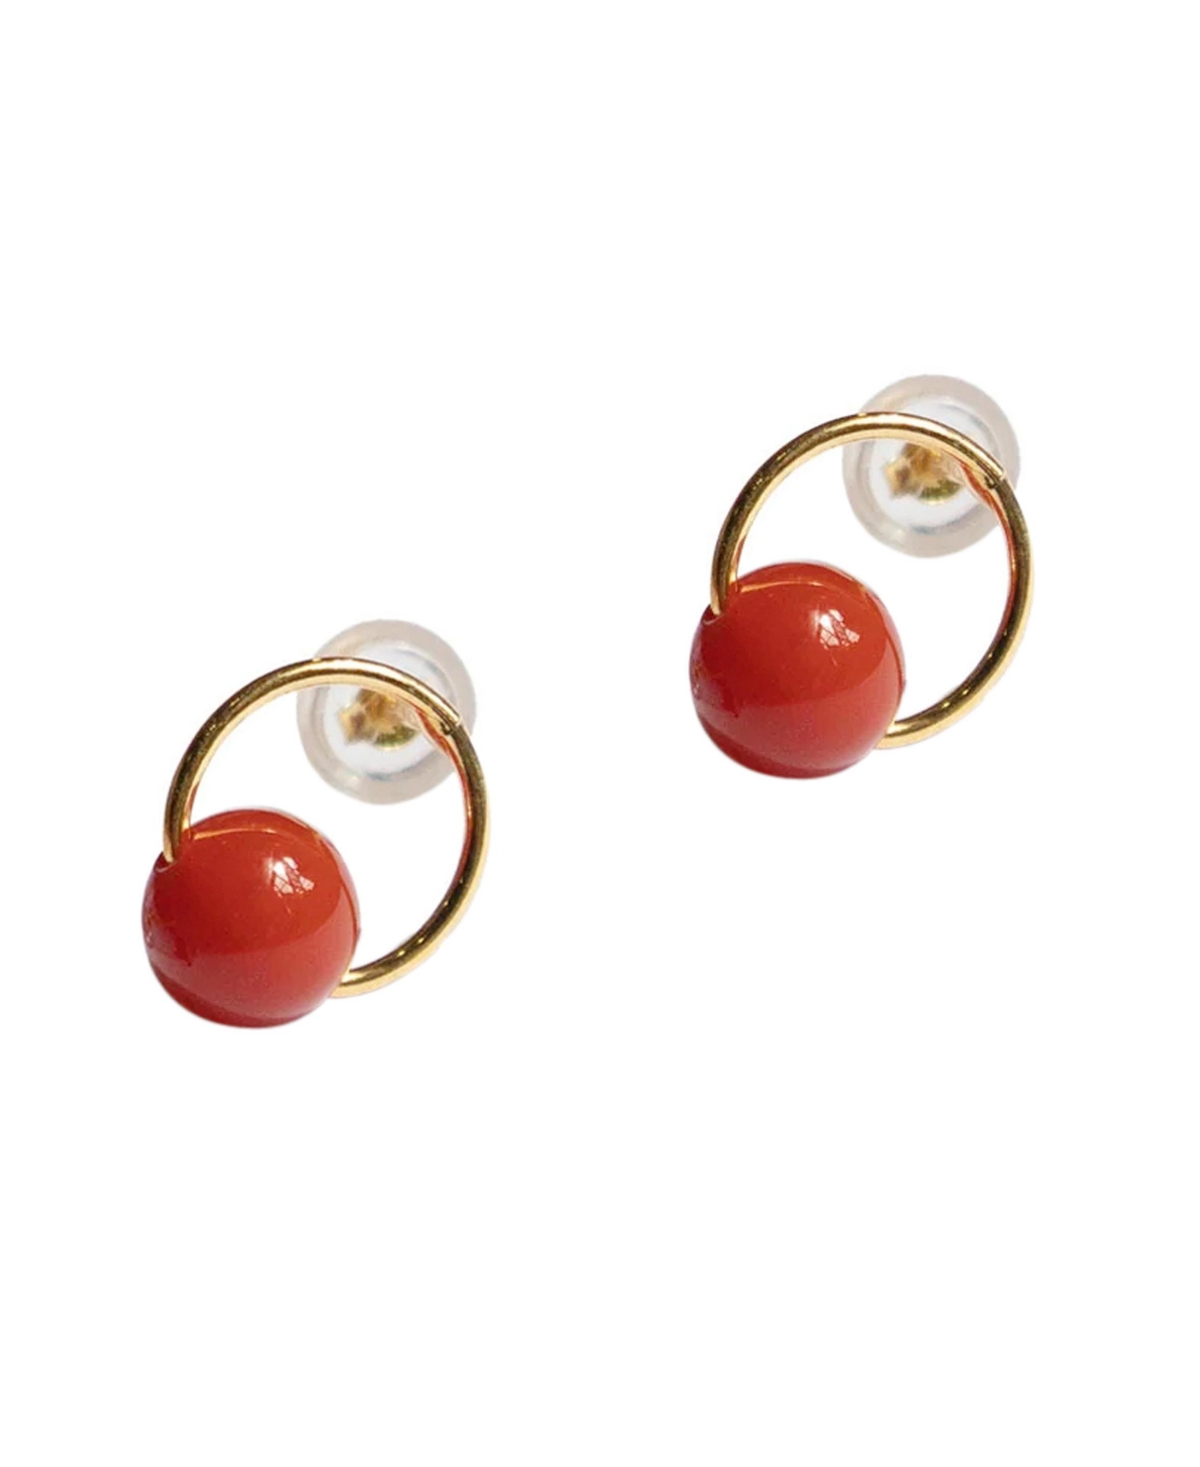 Red bean - Red agate earrings - Red